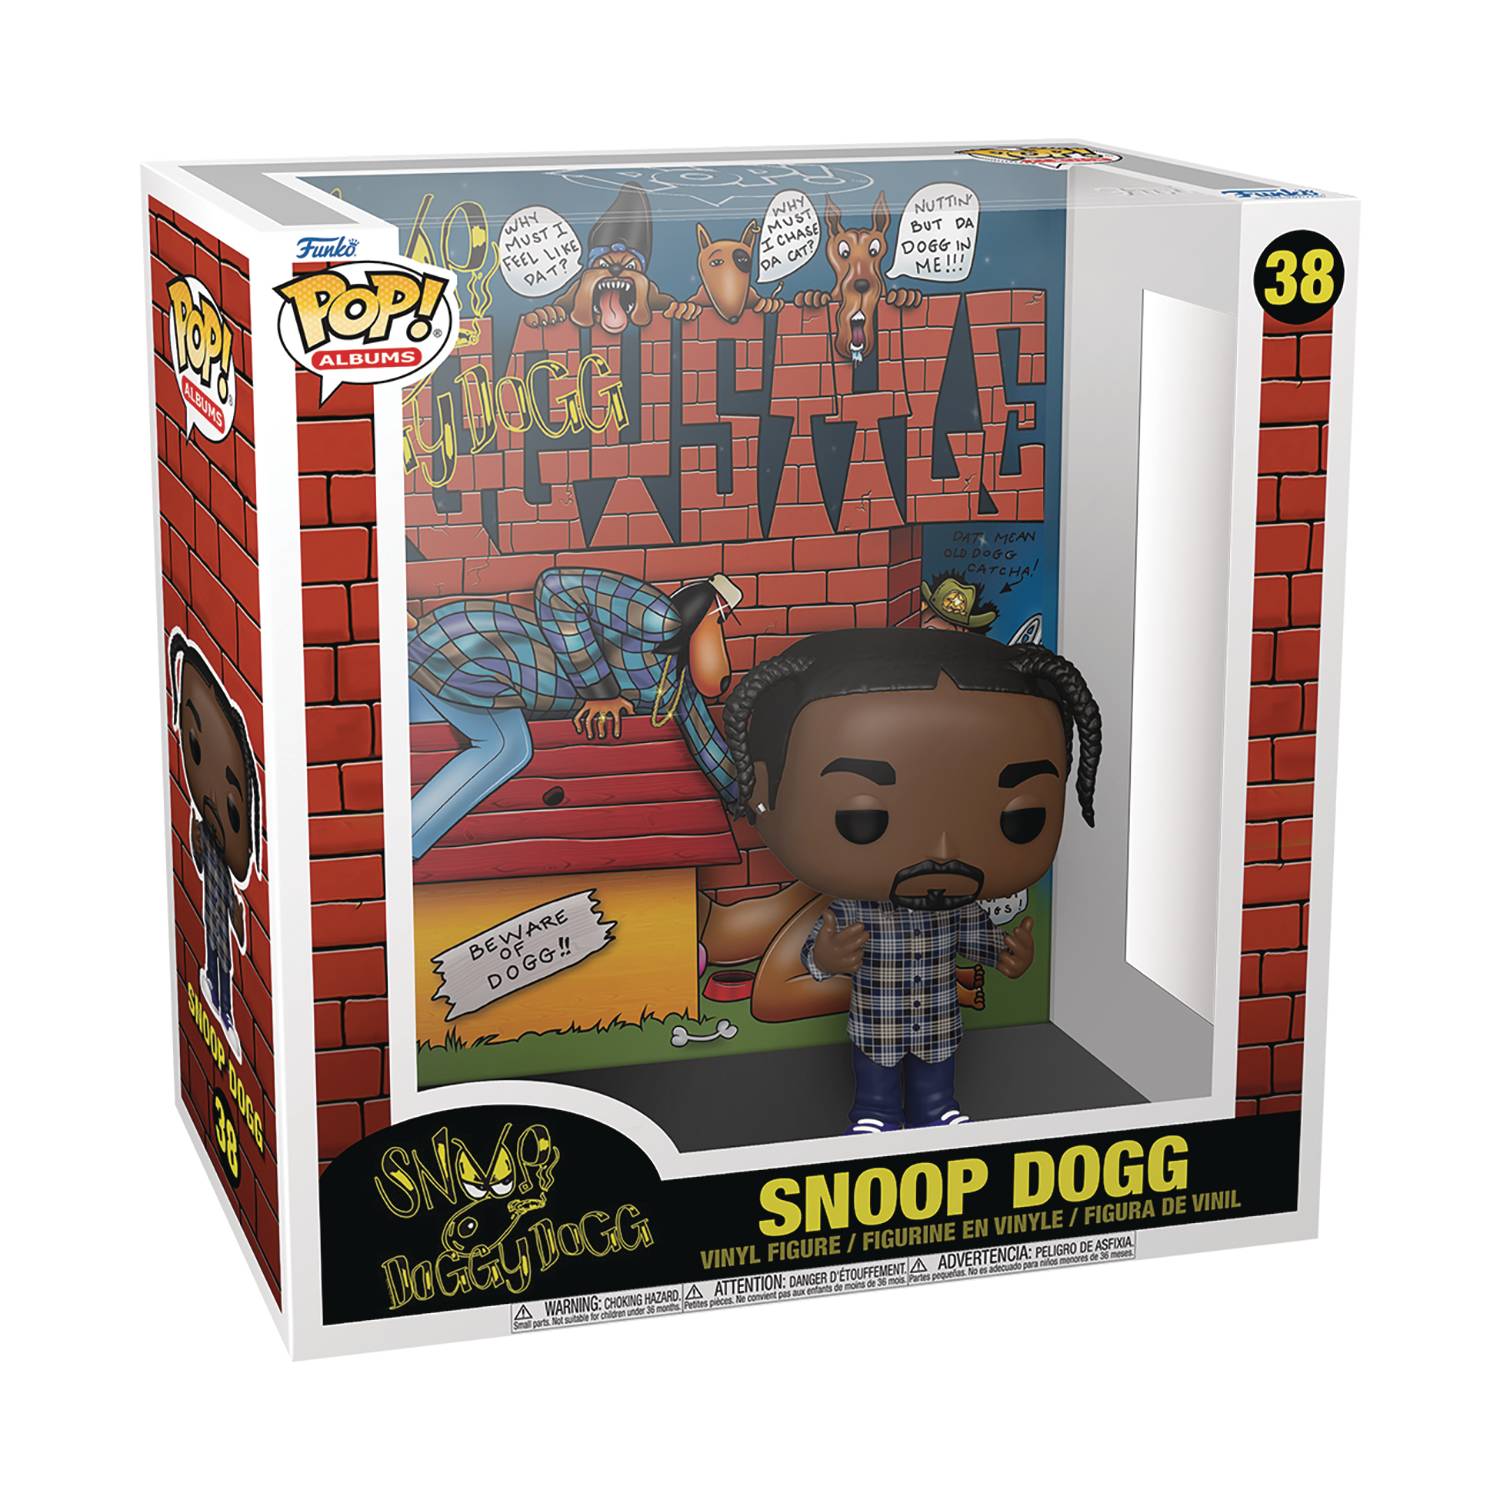 POP ALBUMS SNOOP DOGG DOGGYSTYLE VIN FIG